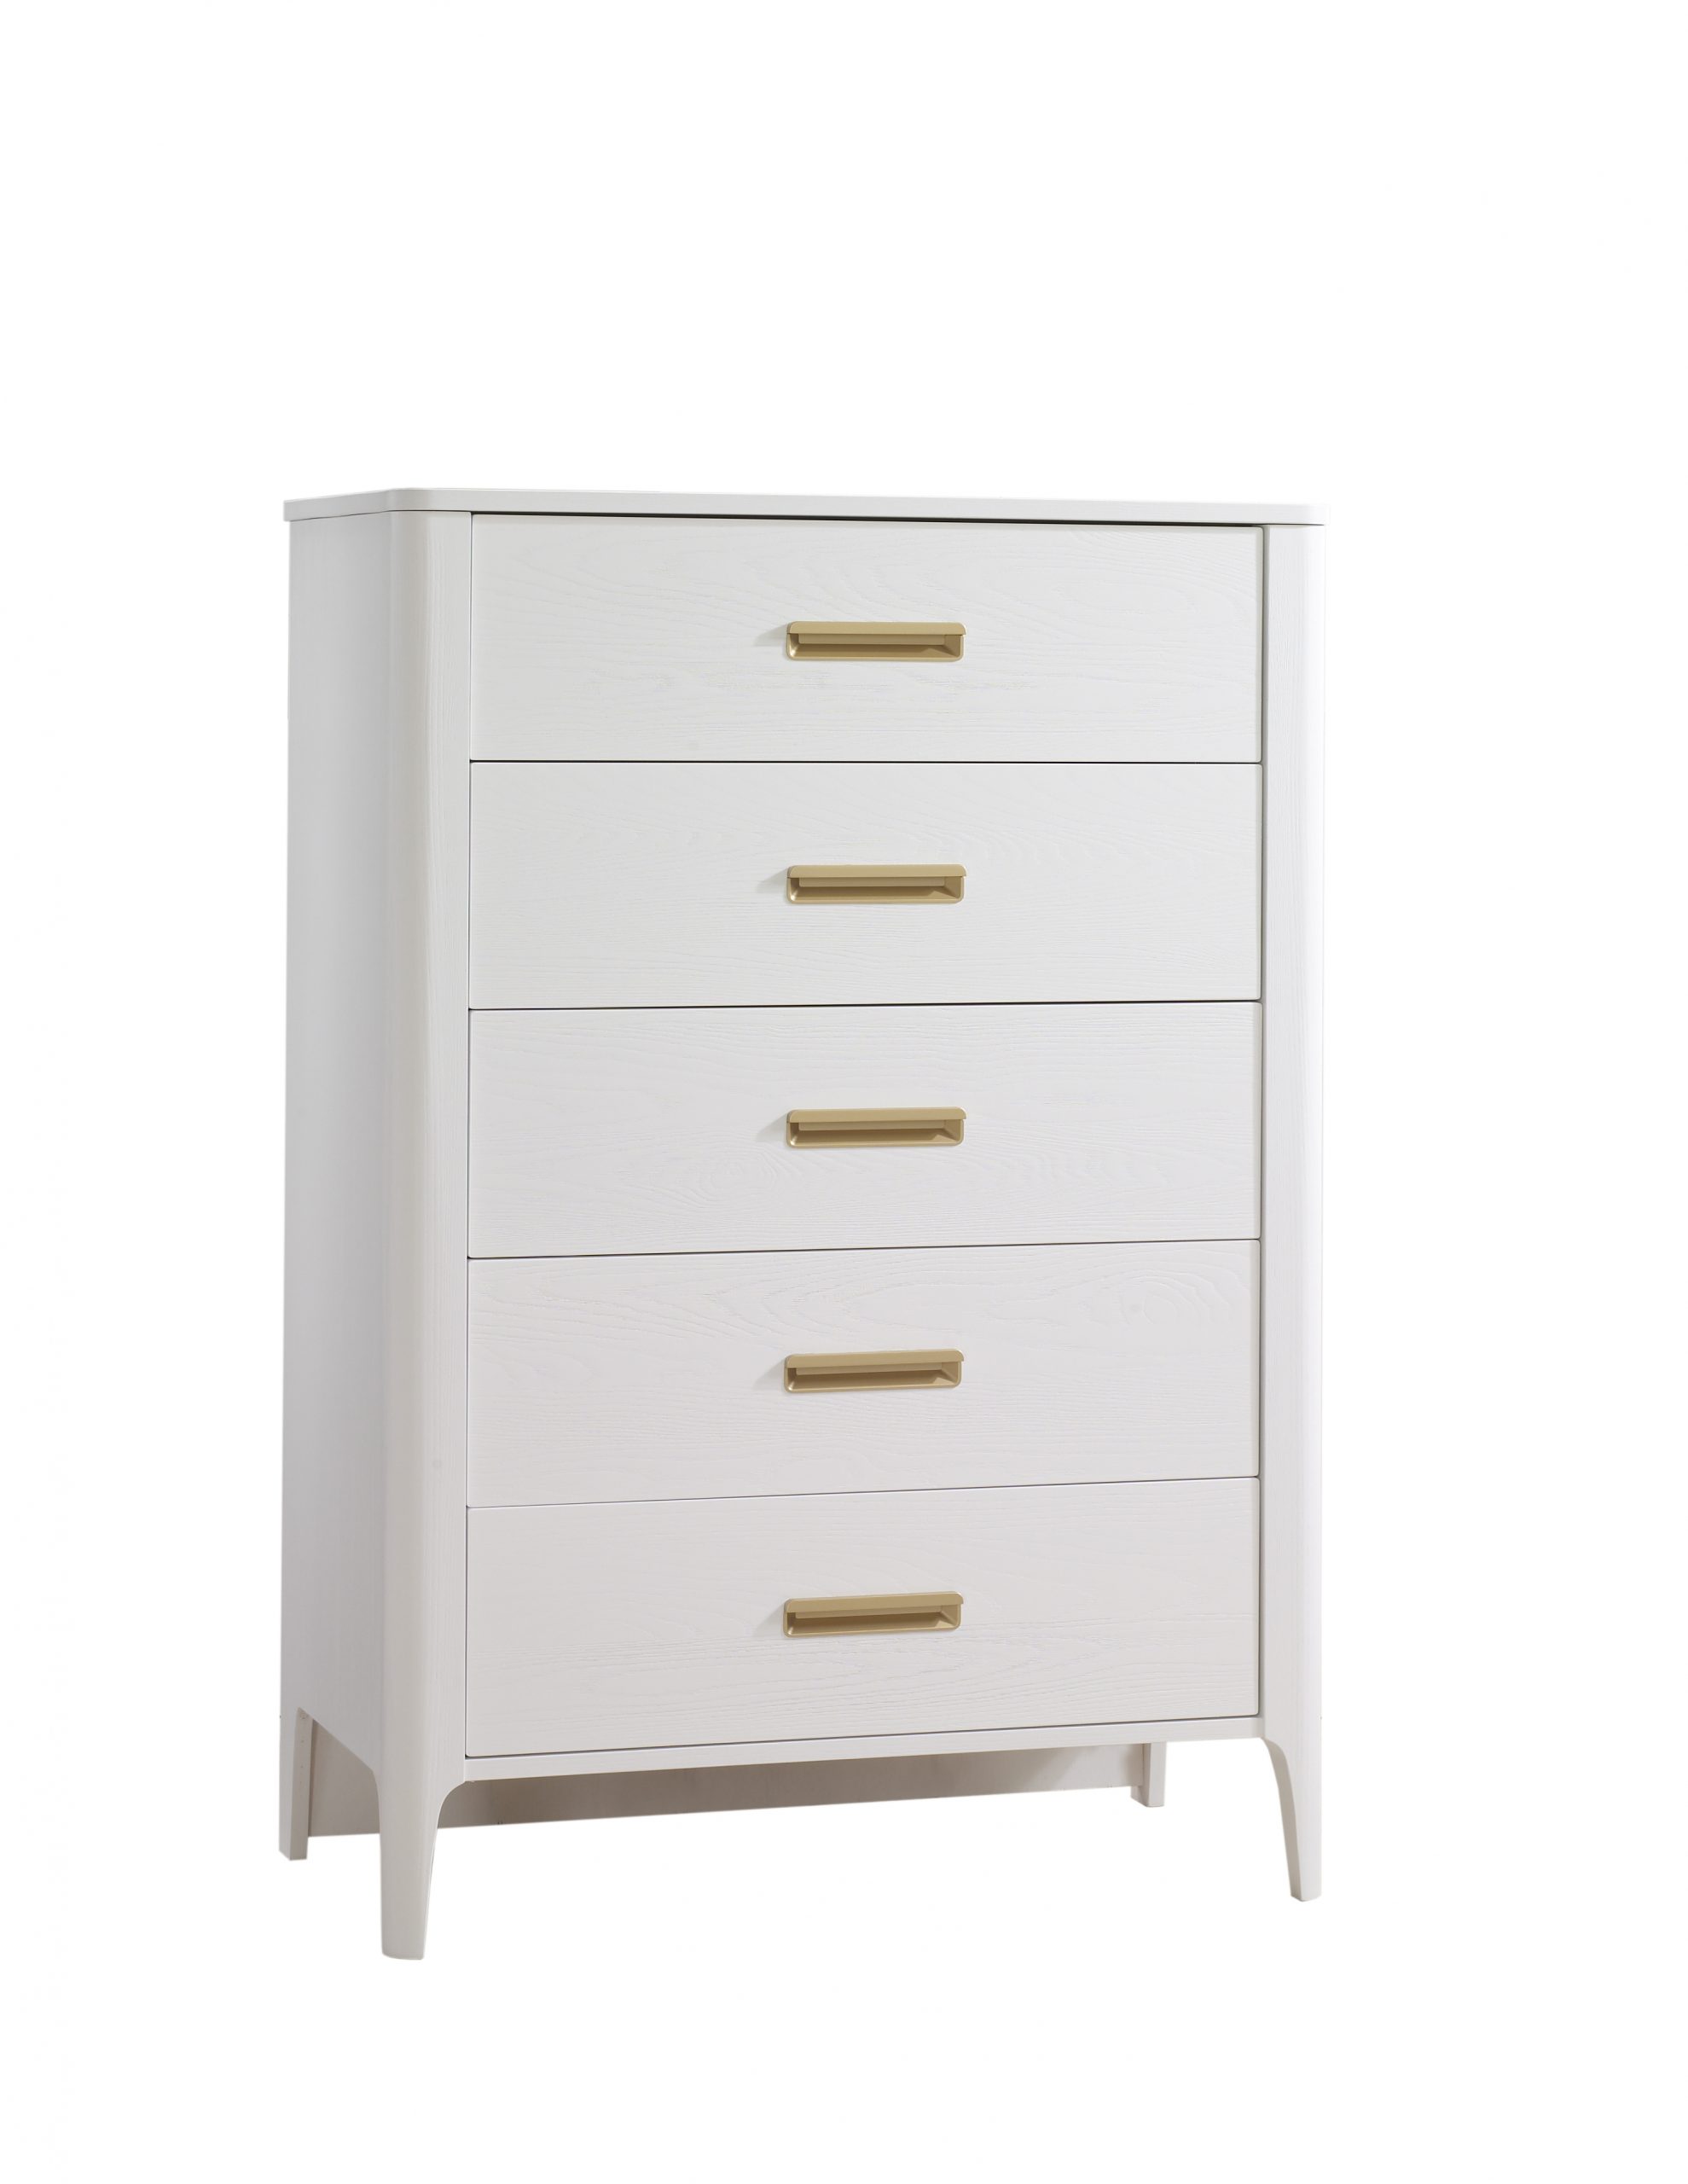 Palo 5 Drawer Tall Chest in White